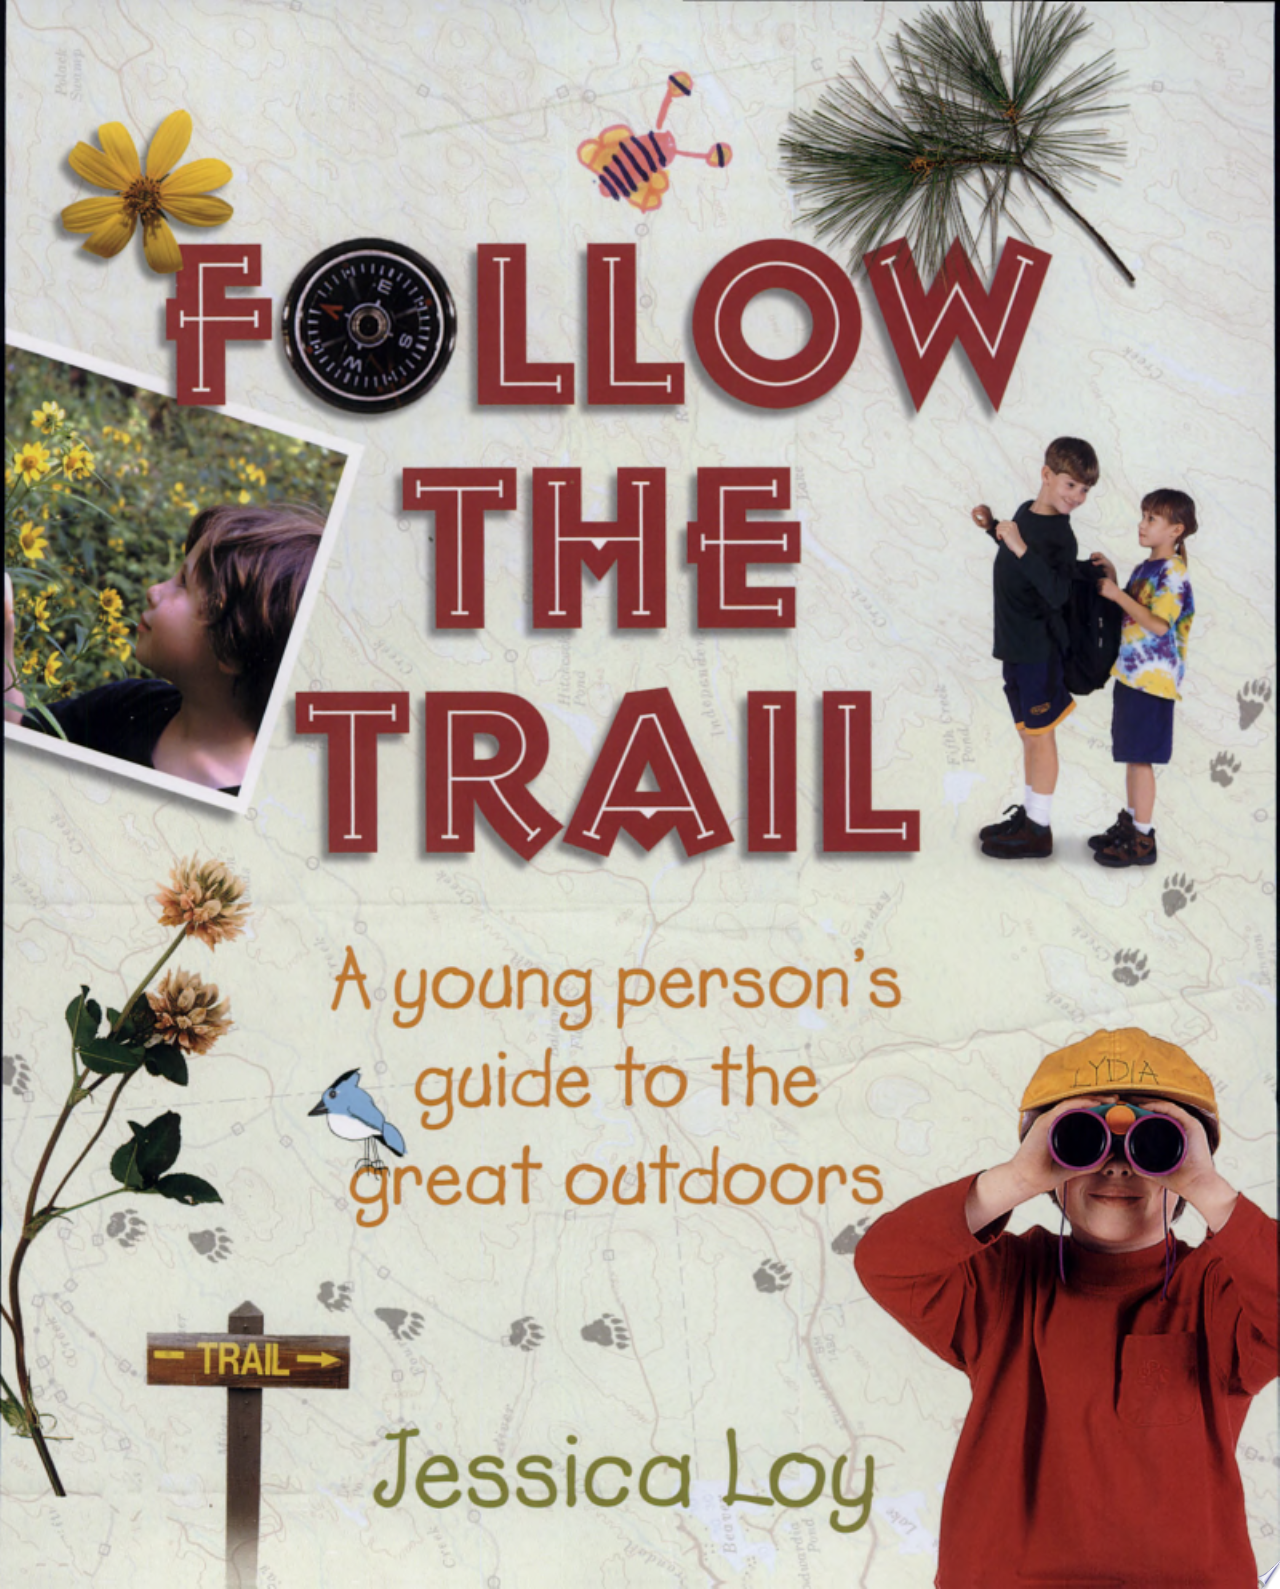 Image for "Follow the Trail"